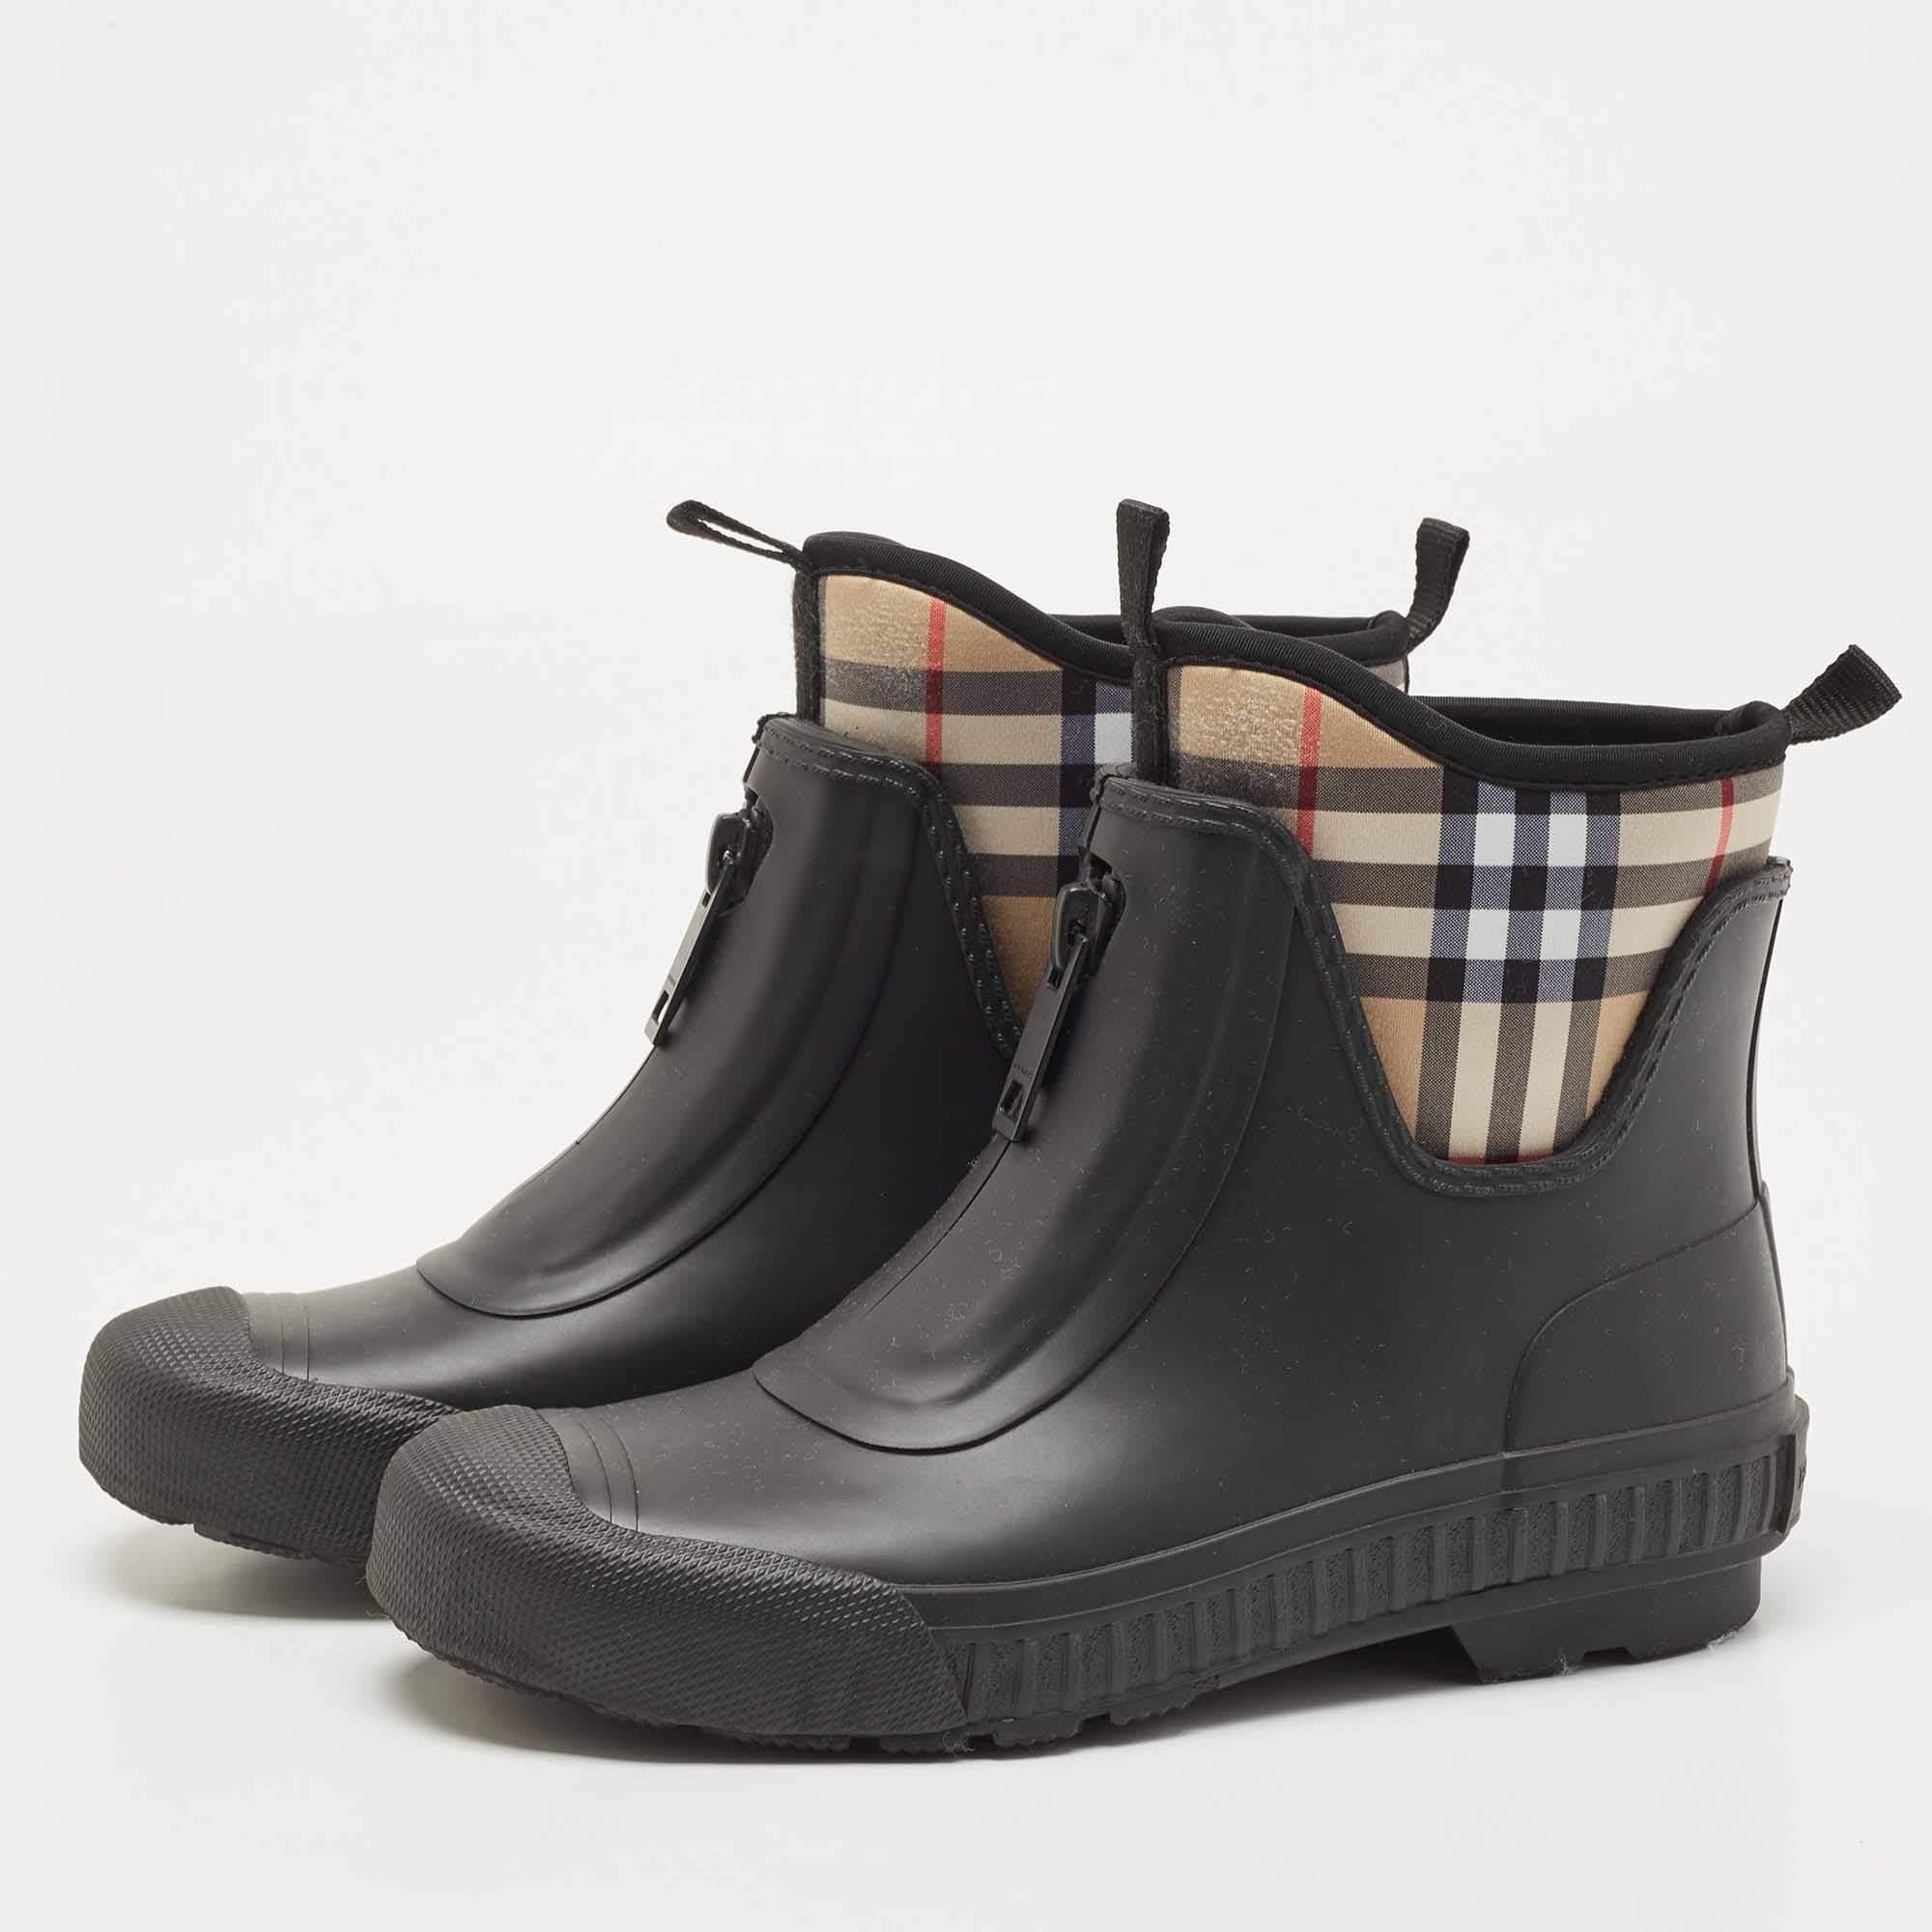 Women's Burberry Black Rubber and Vintage Check Neoprene Rain Boots Size 37